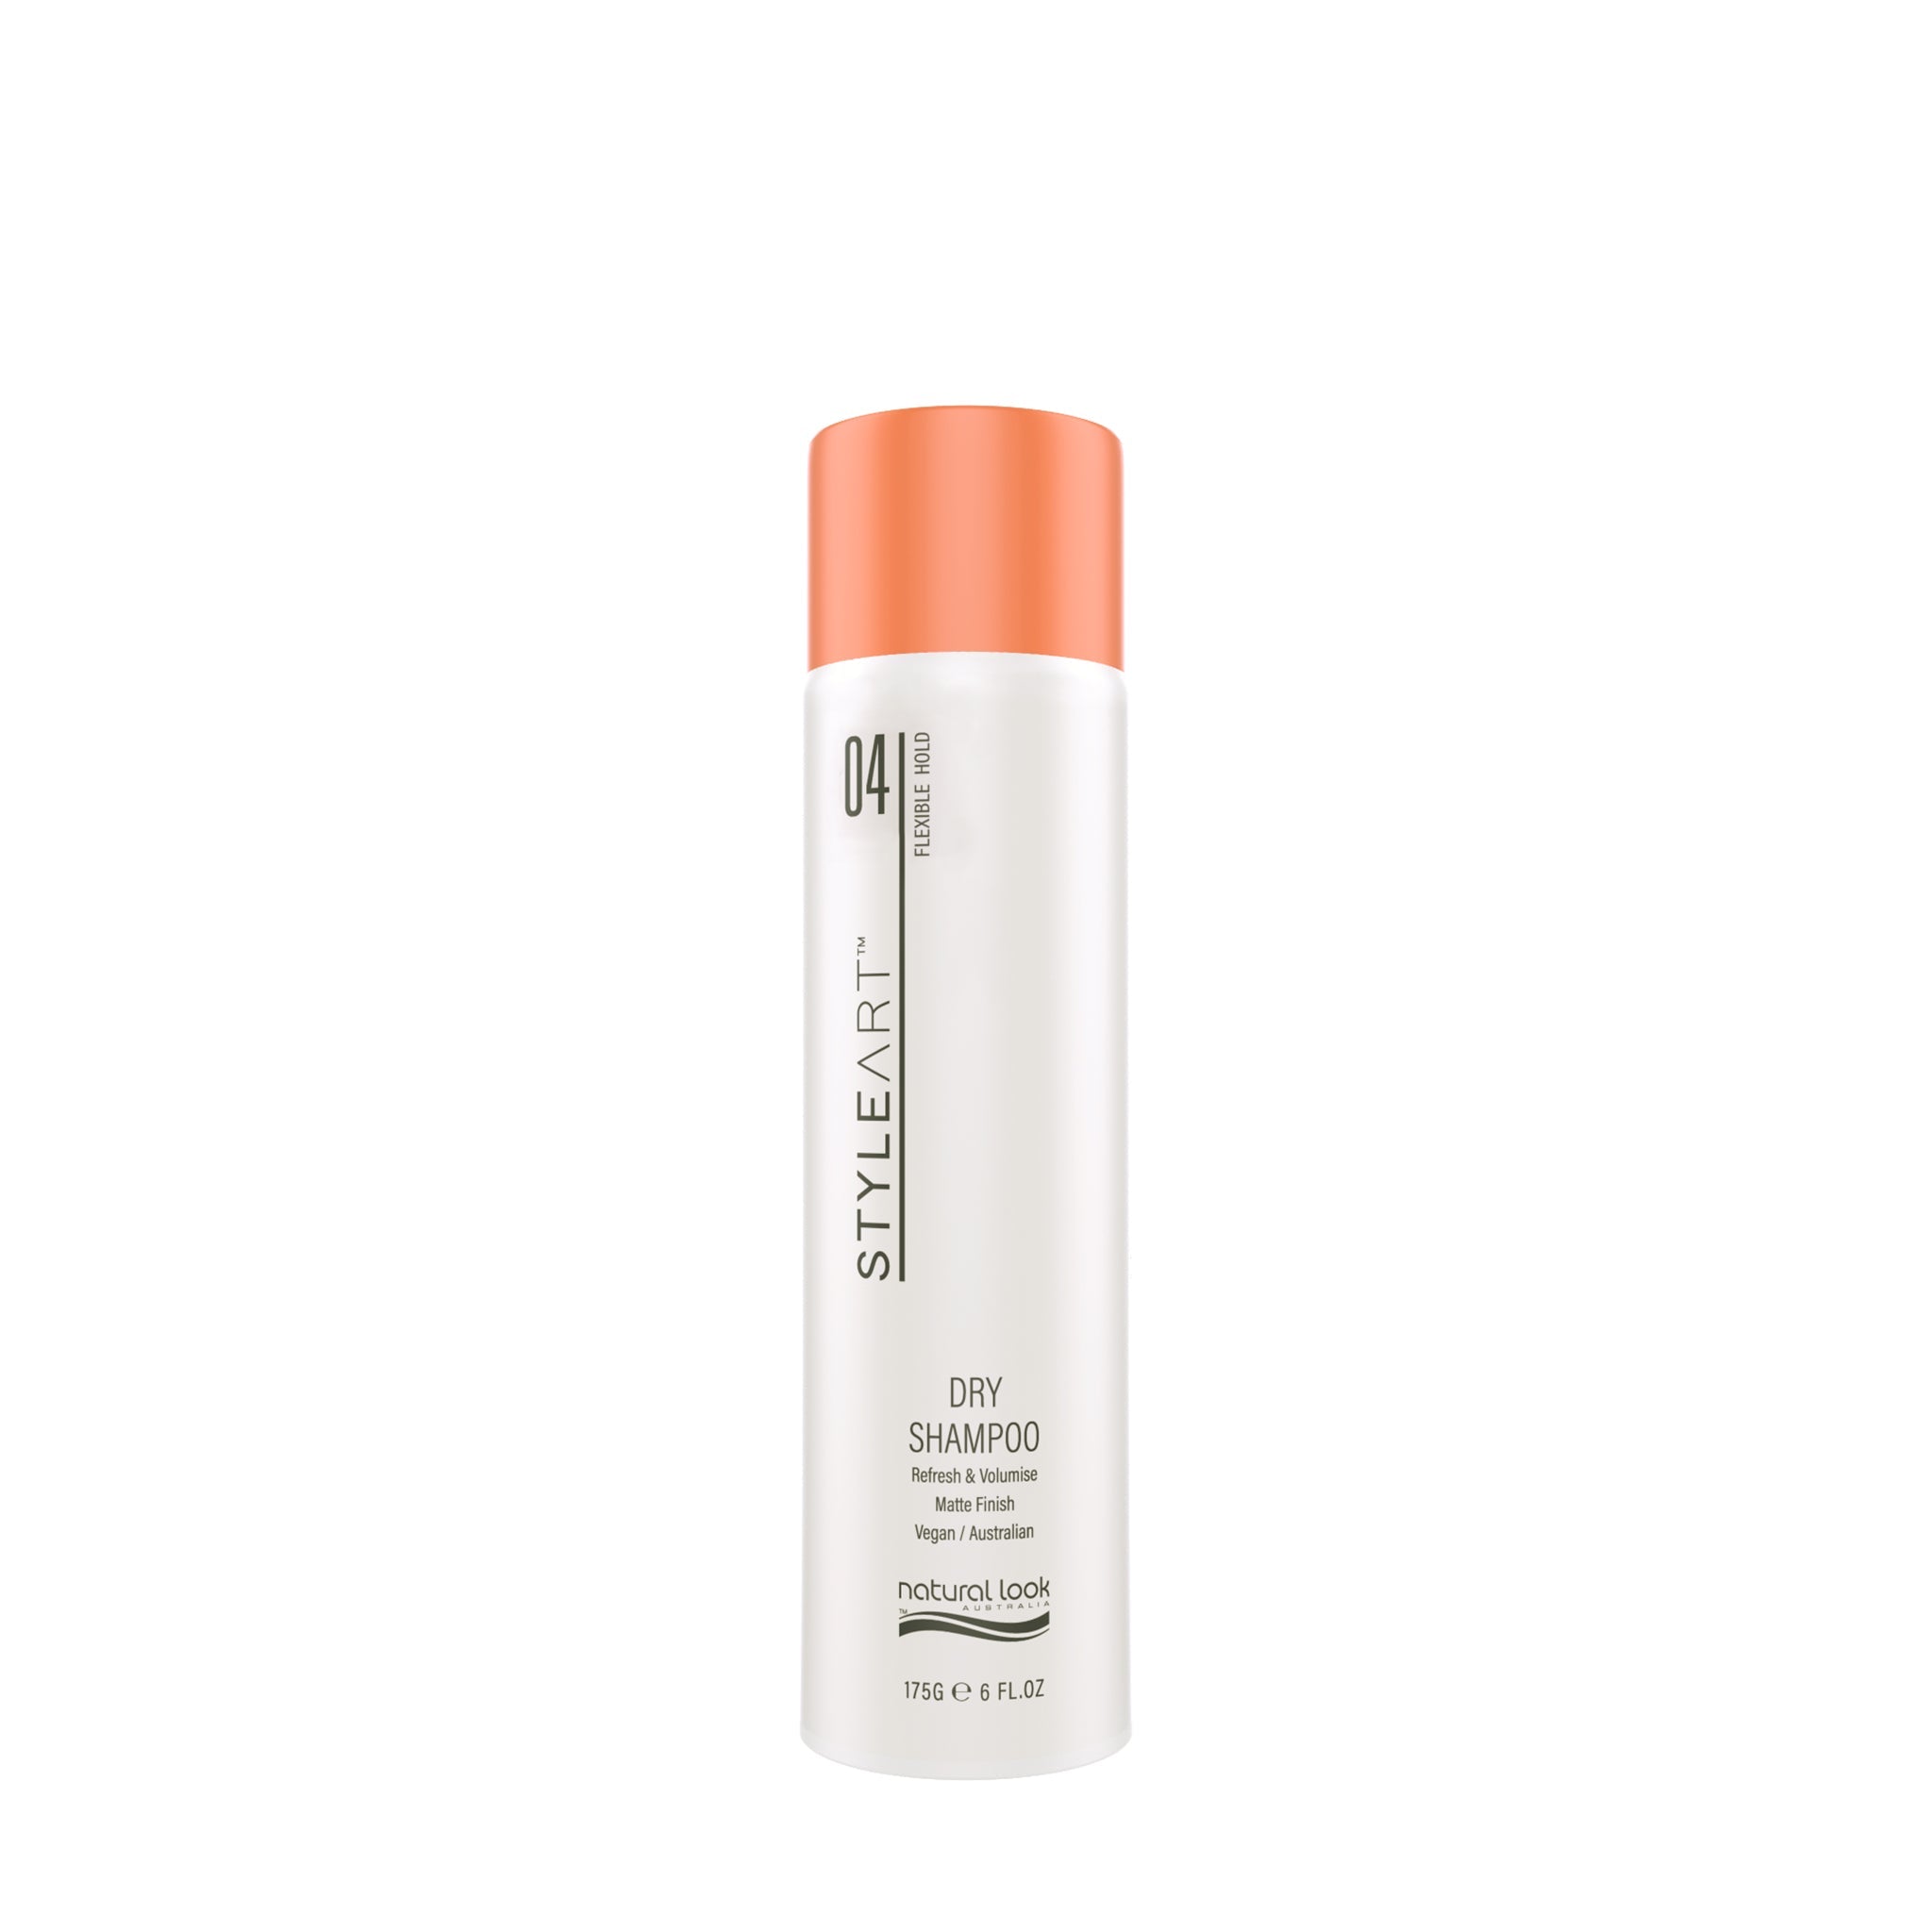 Natural Look StyleArt Dry Shampoo 175g